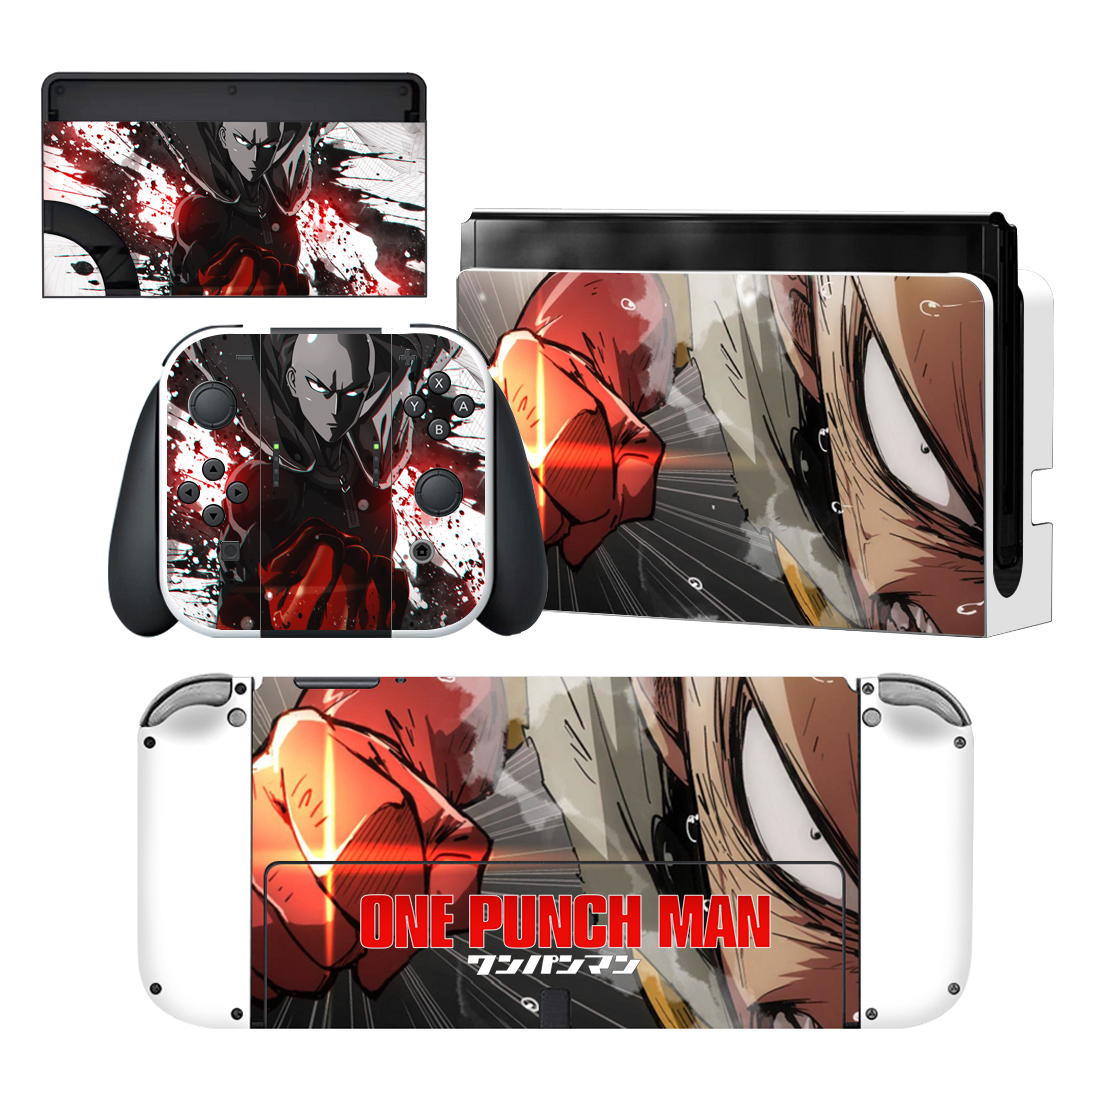 One Punch Man Skin Sticker For Nintendo Switch OLED